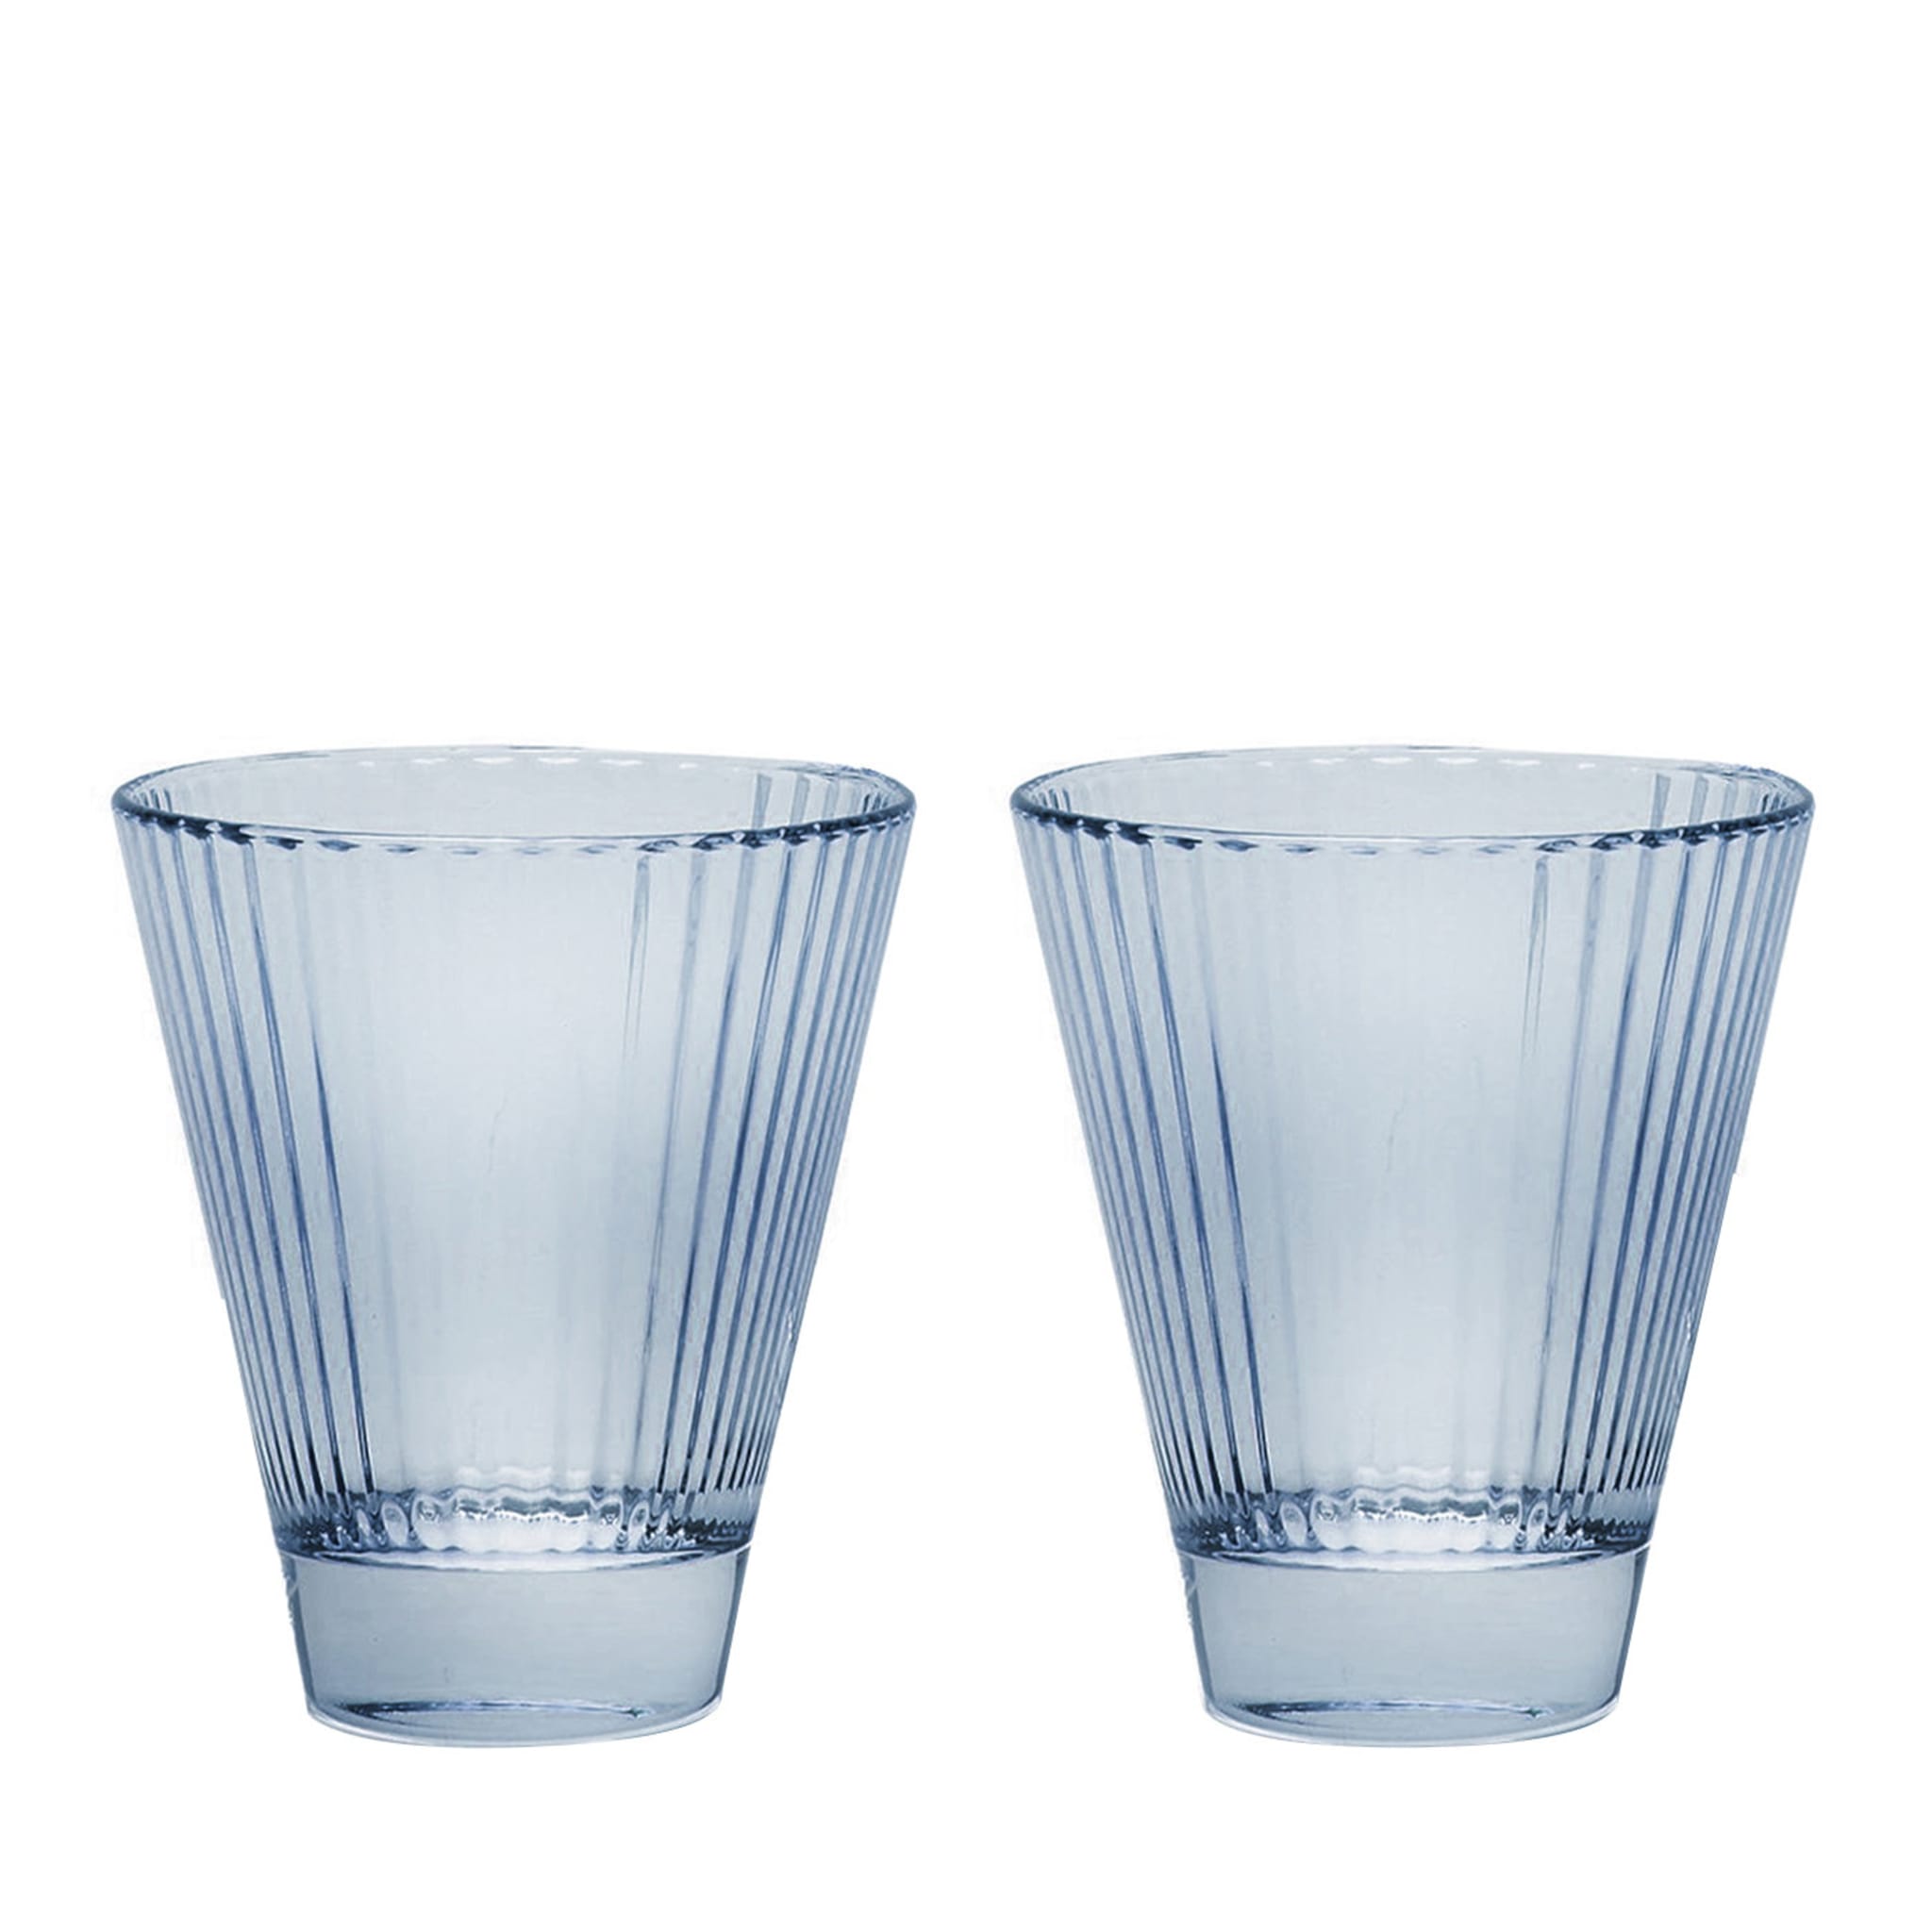 Isis Set of 2 Blue Wine Glasses - Alternative view 1